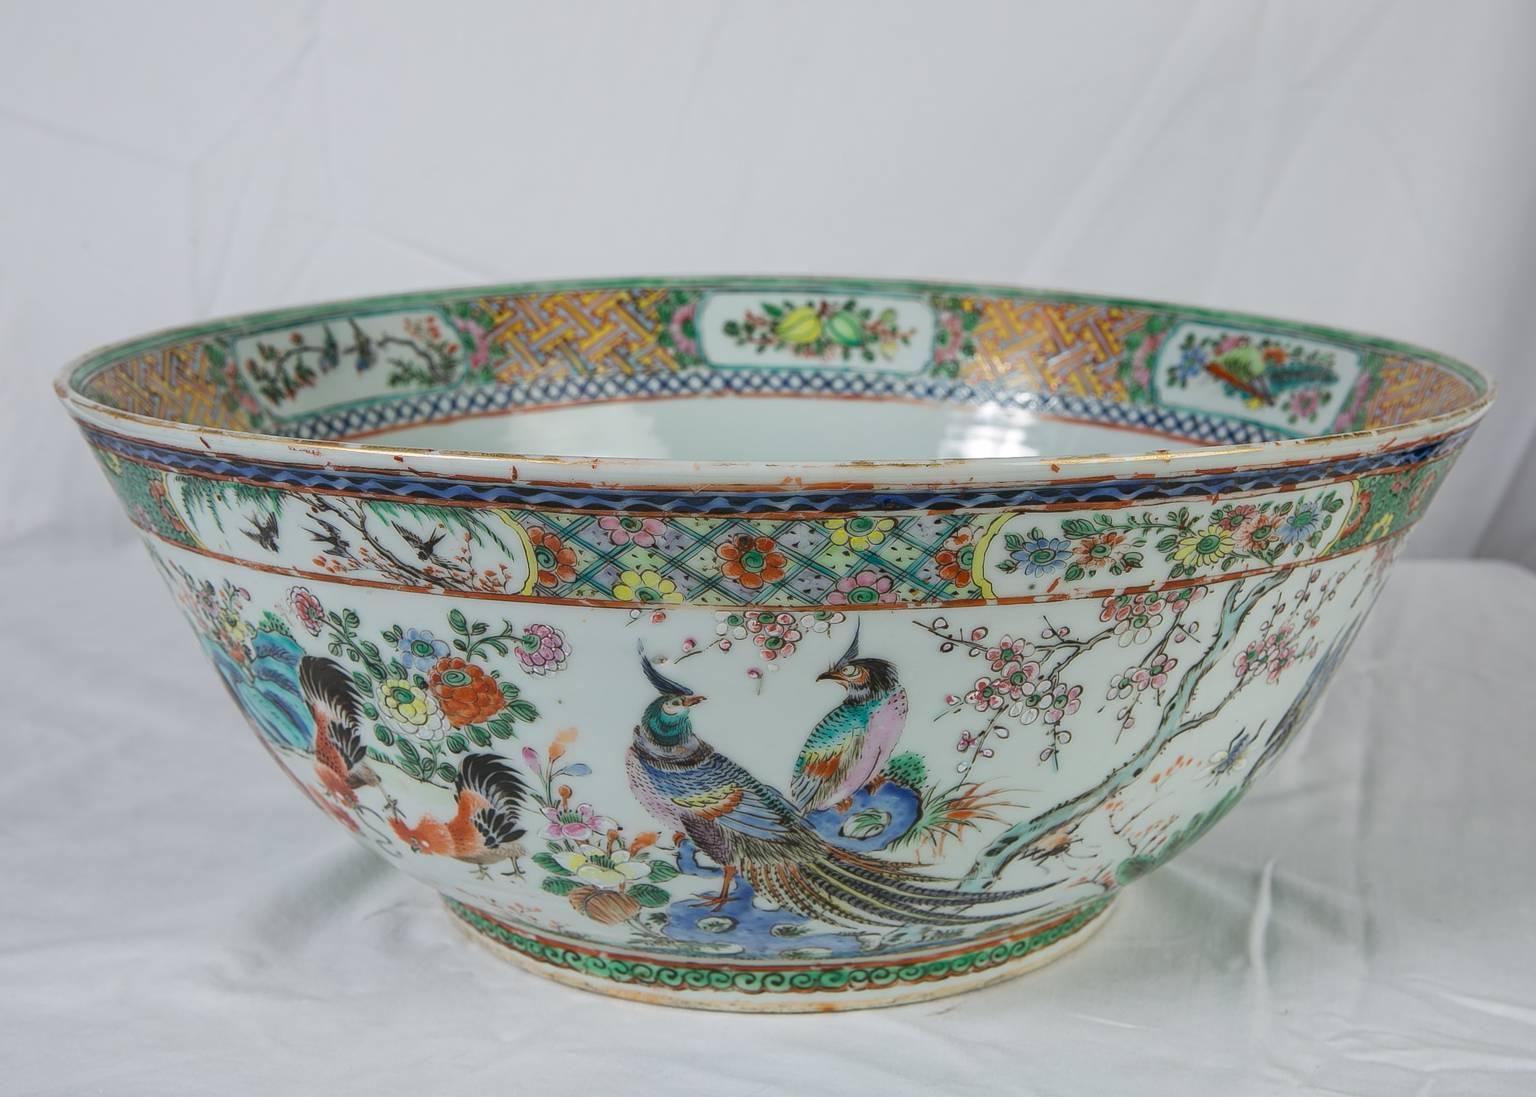 19th Century Antique Chinese Porcelain Punch Bowl